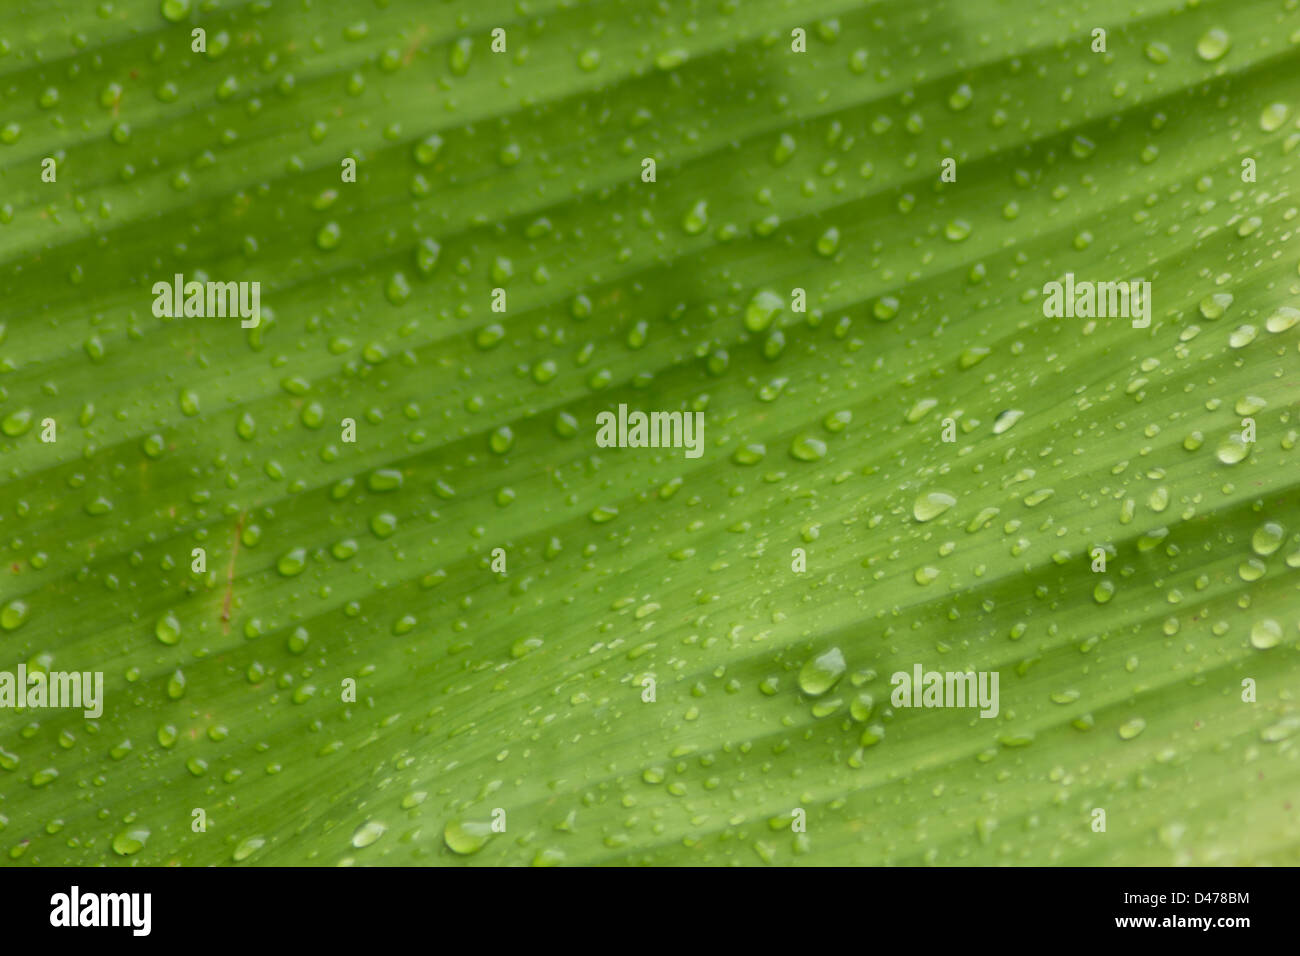 Abstract shot of banana leaf after the rain Stock Photo